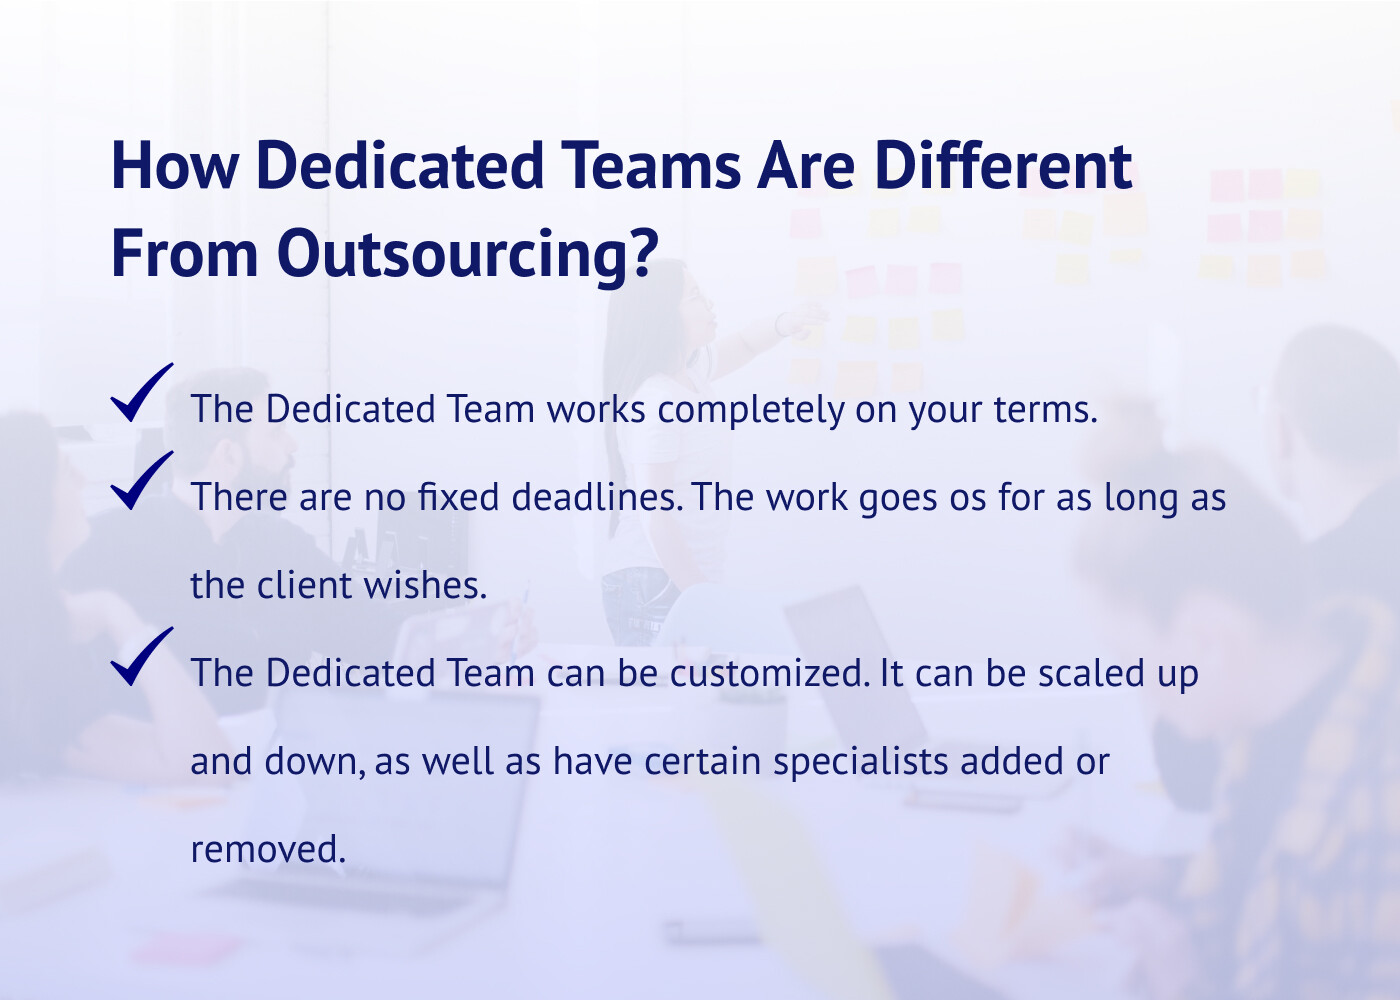 1 didecated team difference - Why Hire Dedicated Teams for Insurance Software Development